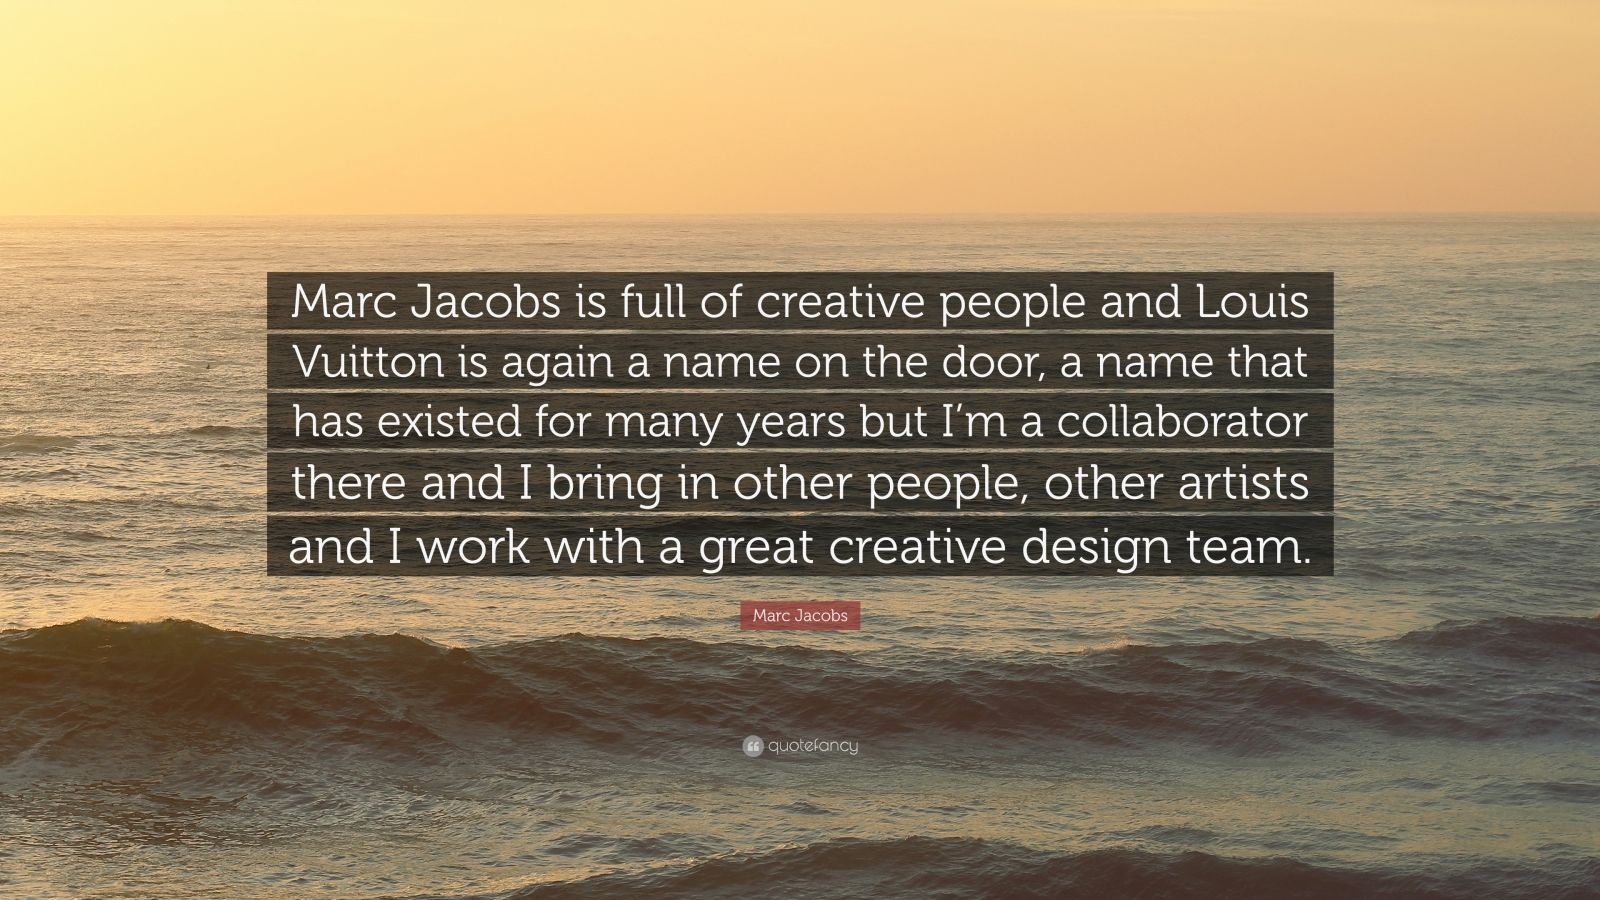 Marc Jacobs Quote: “Marc Jacobs is full of creative people and Louis